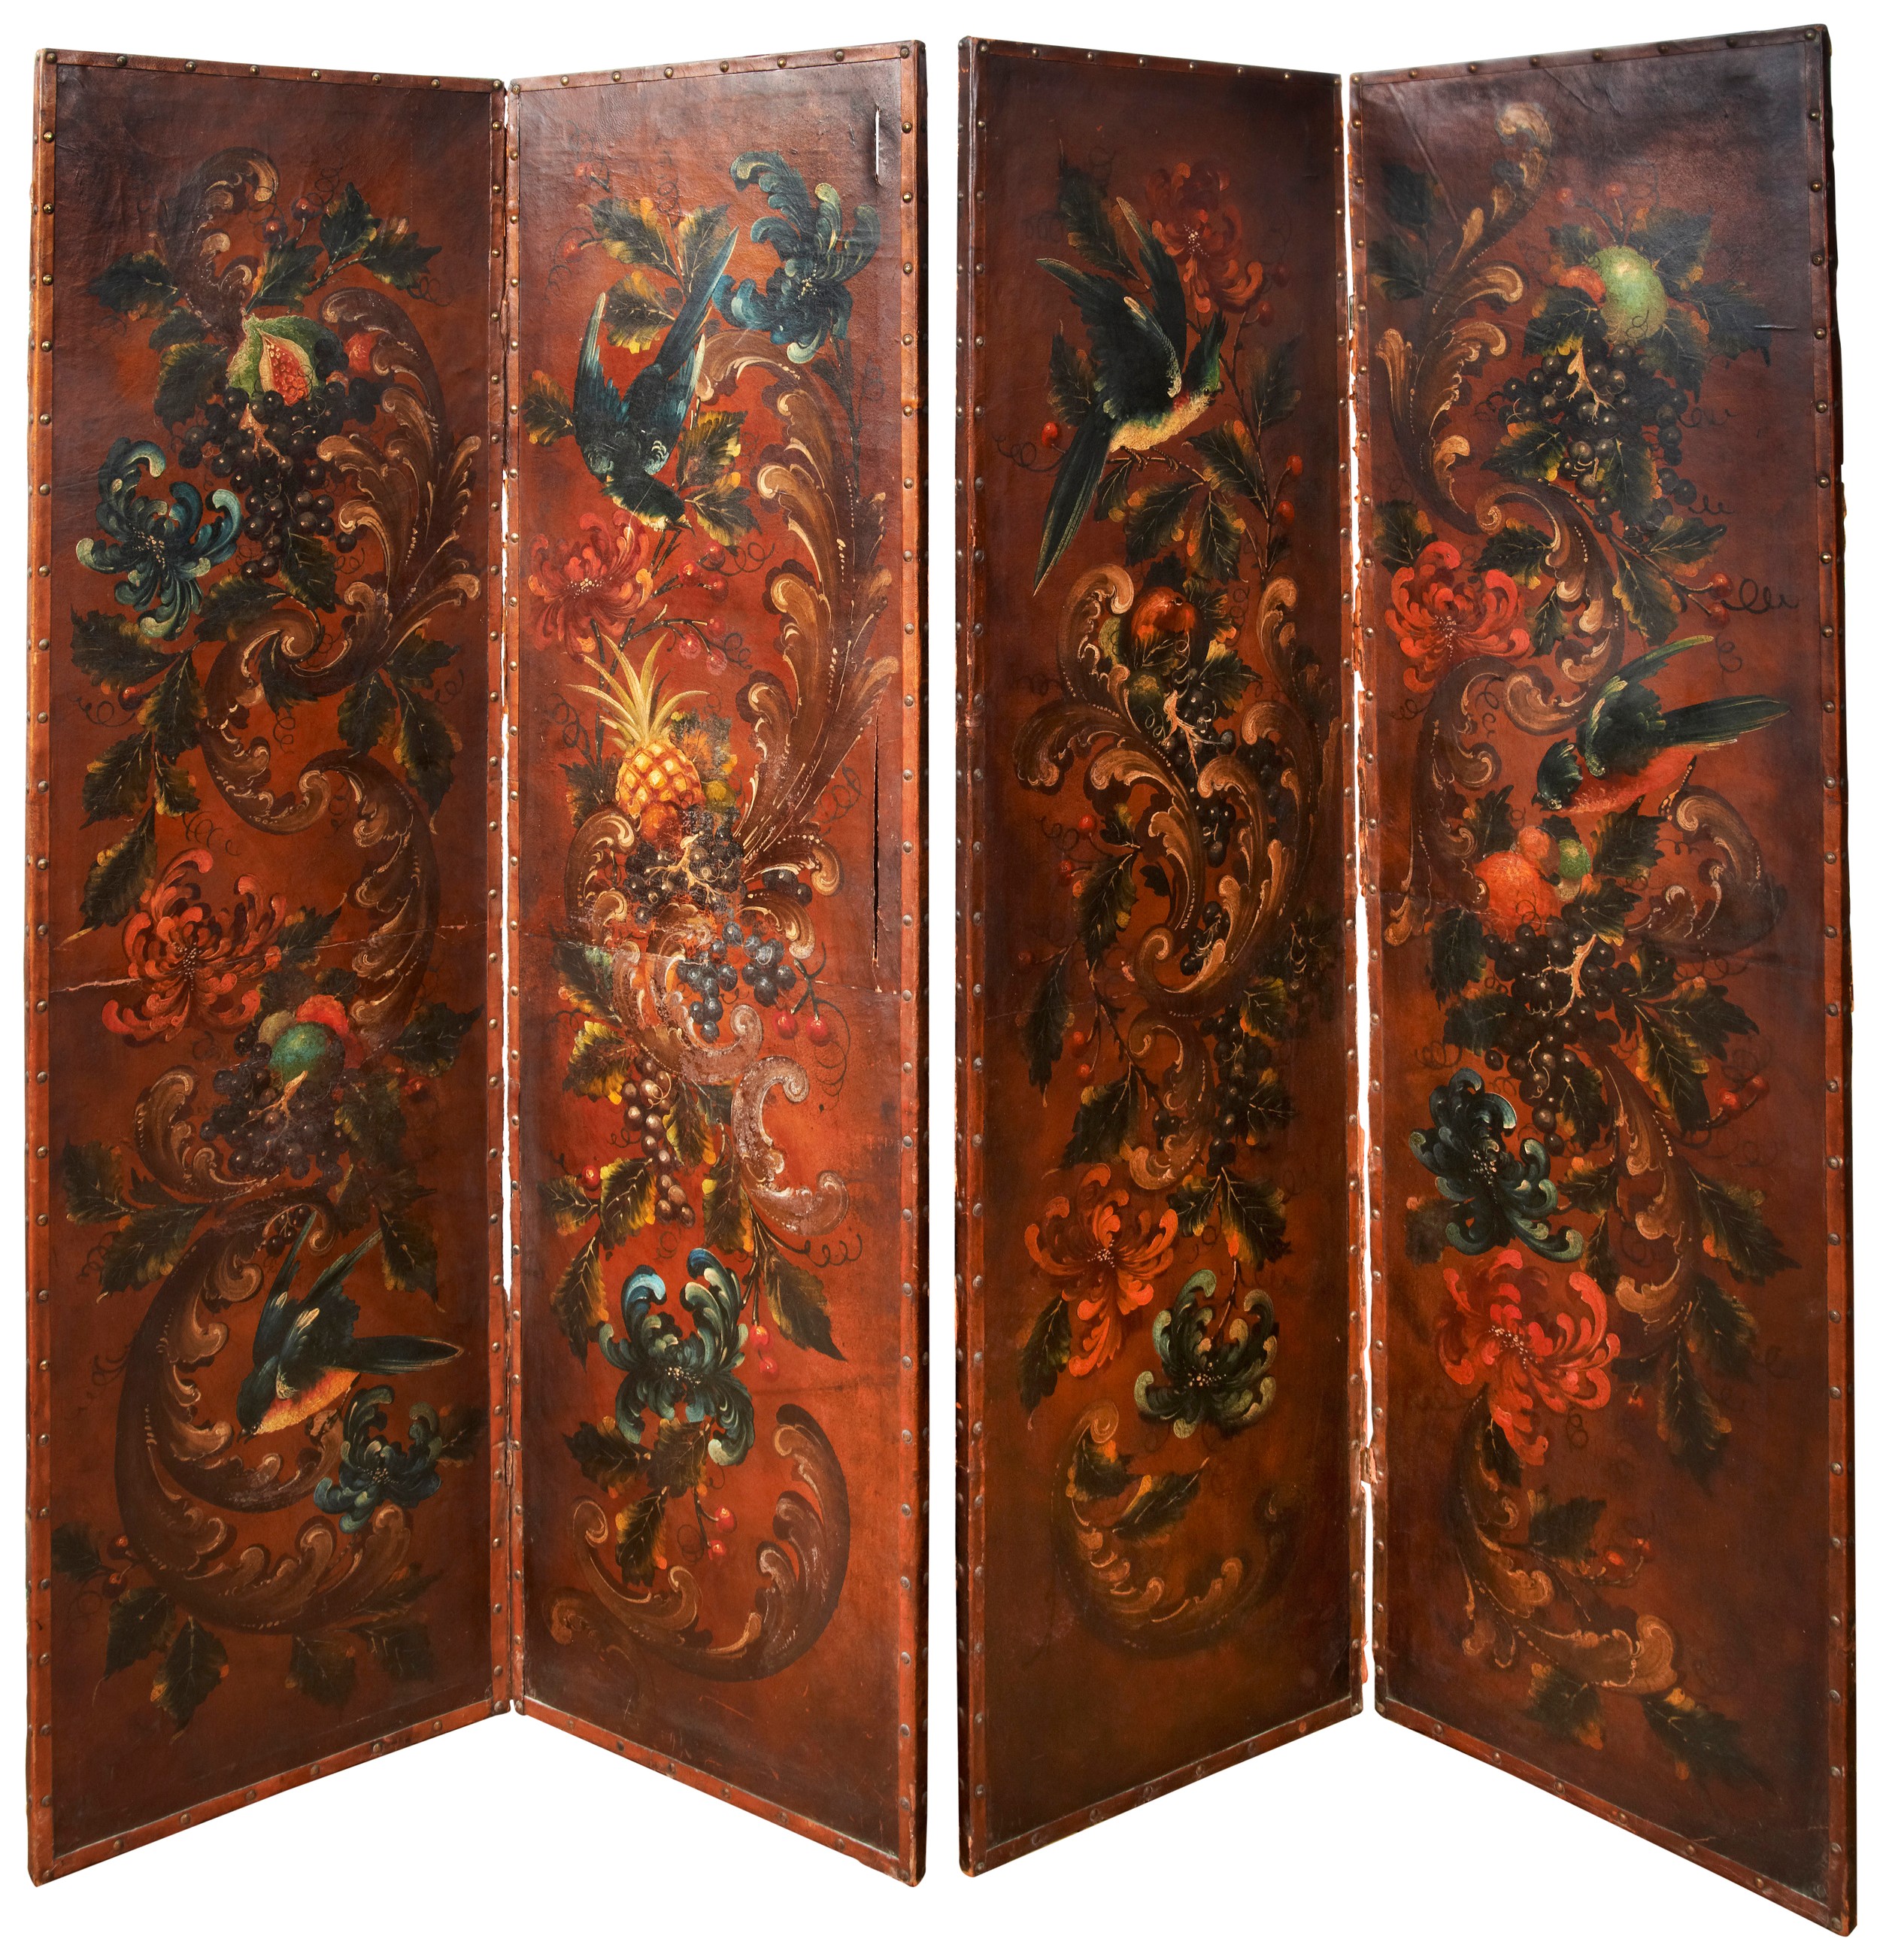 A FOUR FOLD LEATHER PANEL SCREEN, in two sections, vibrant painted decoration depicting songbirds